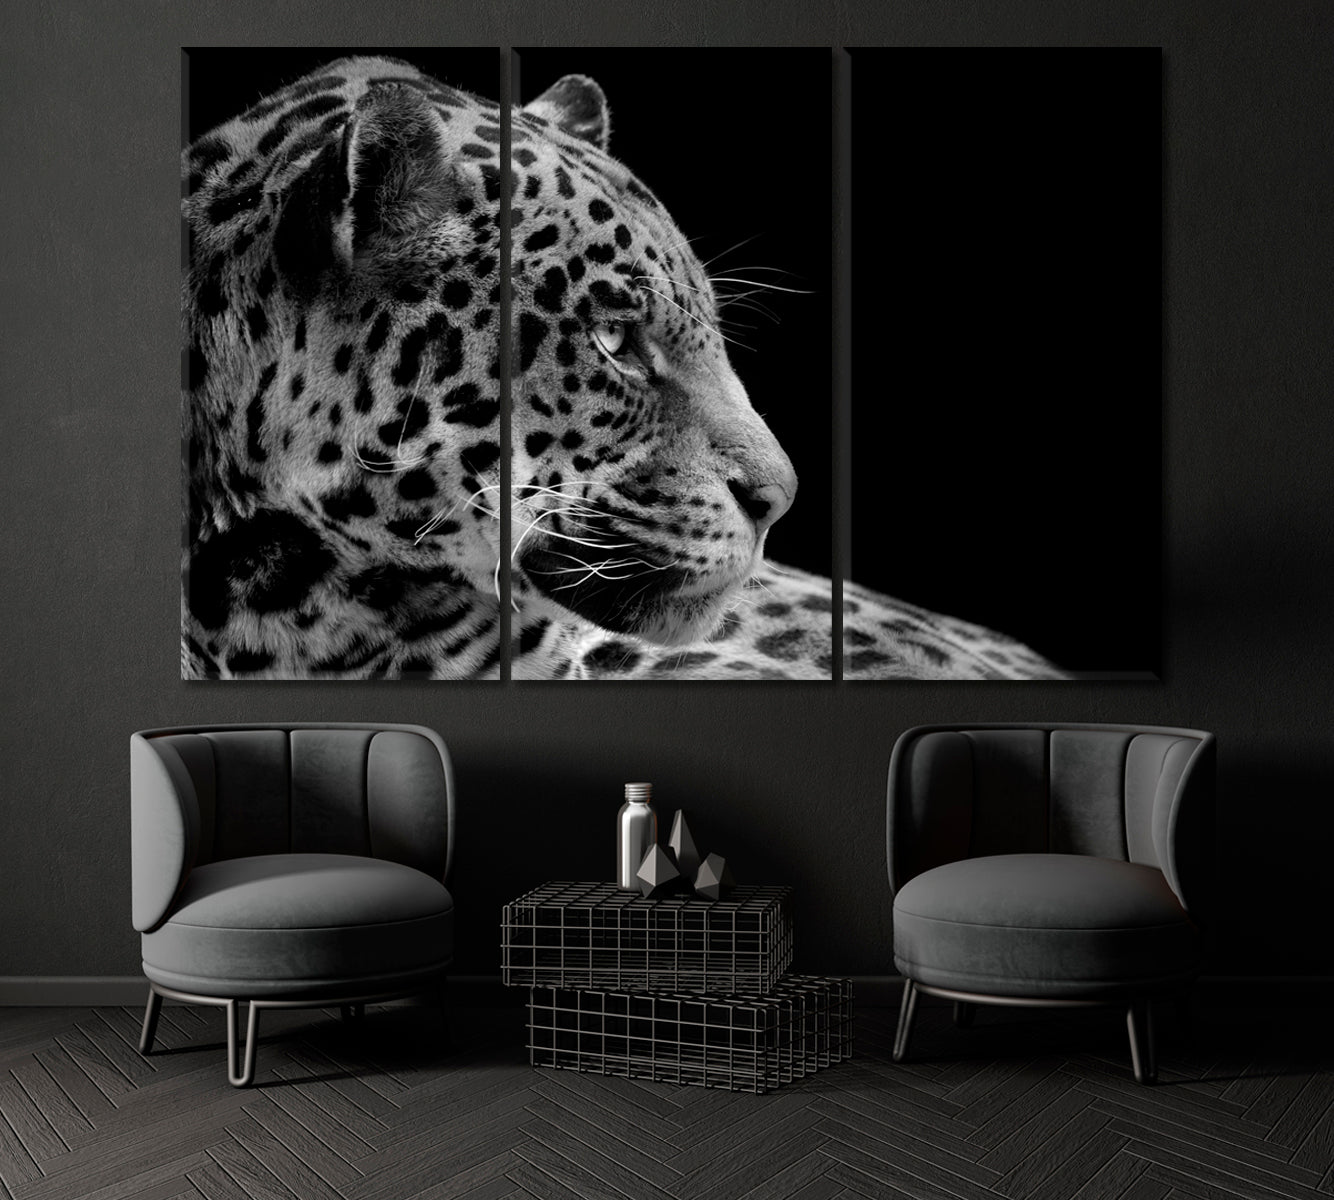 Jaguar in Black and White Canvas Print ArtLexy 3 Panels 36"x24" inches 